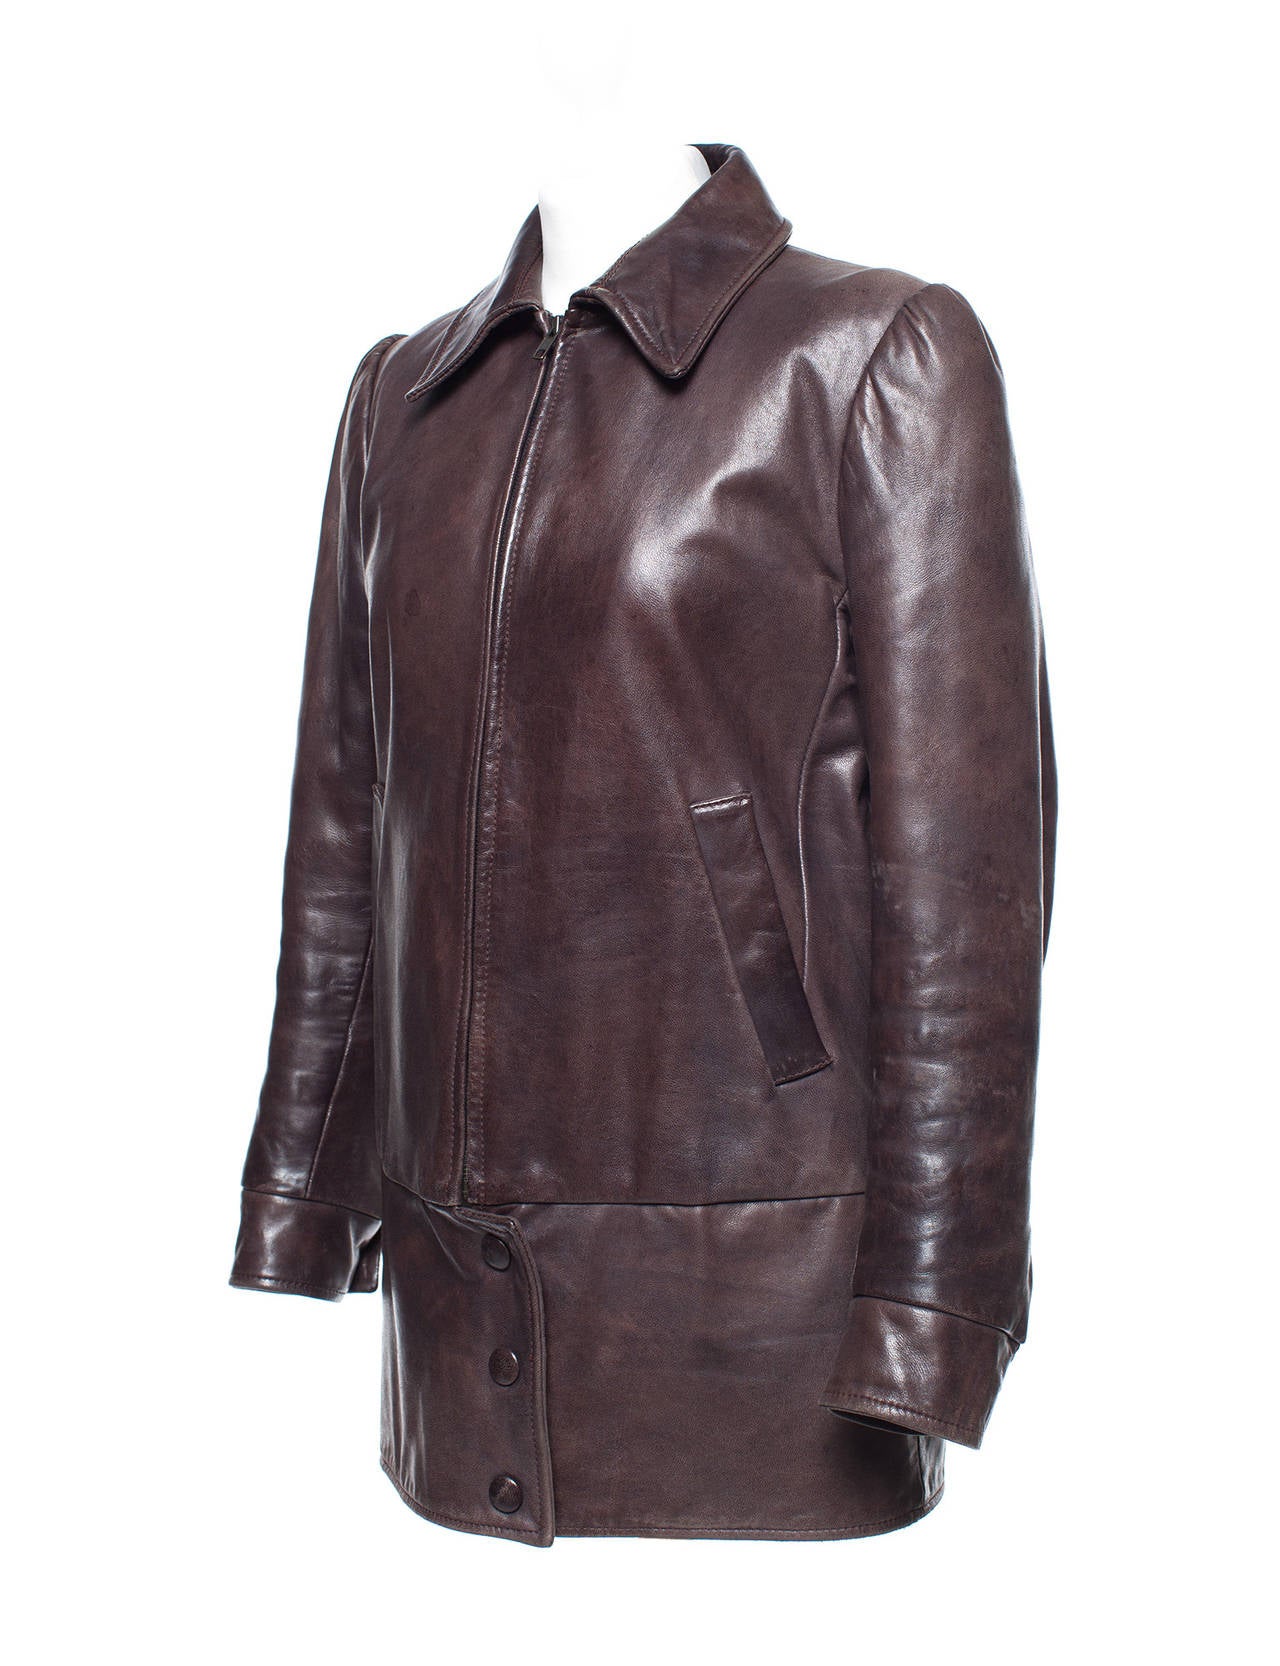 Jacket has been restyled in the shape of a dropped oversized blouson jacket. Looks like recycled leather when actually leather has been distressed to look 60 years old. The cut is similar to a women's 80's puffed sleeved evening look, but with the